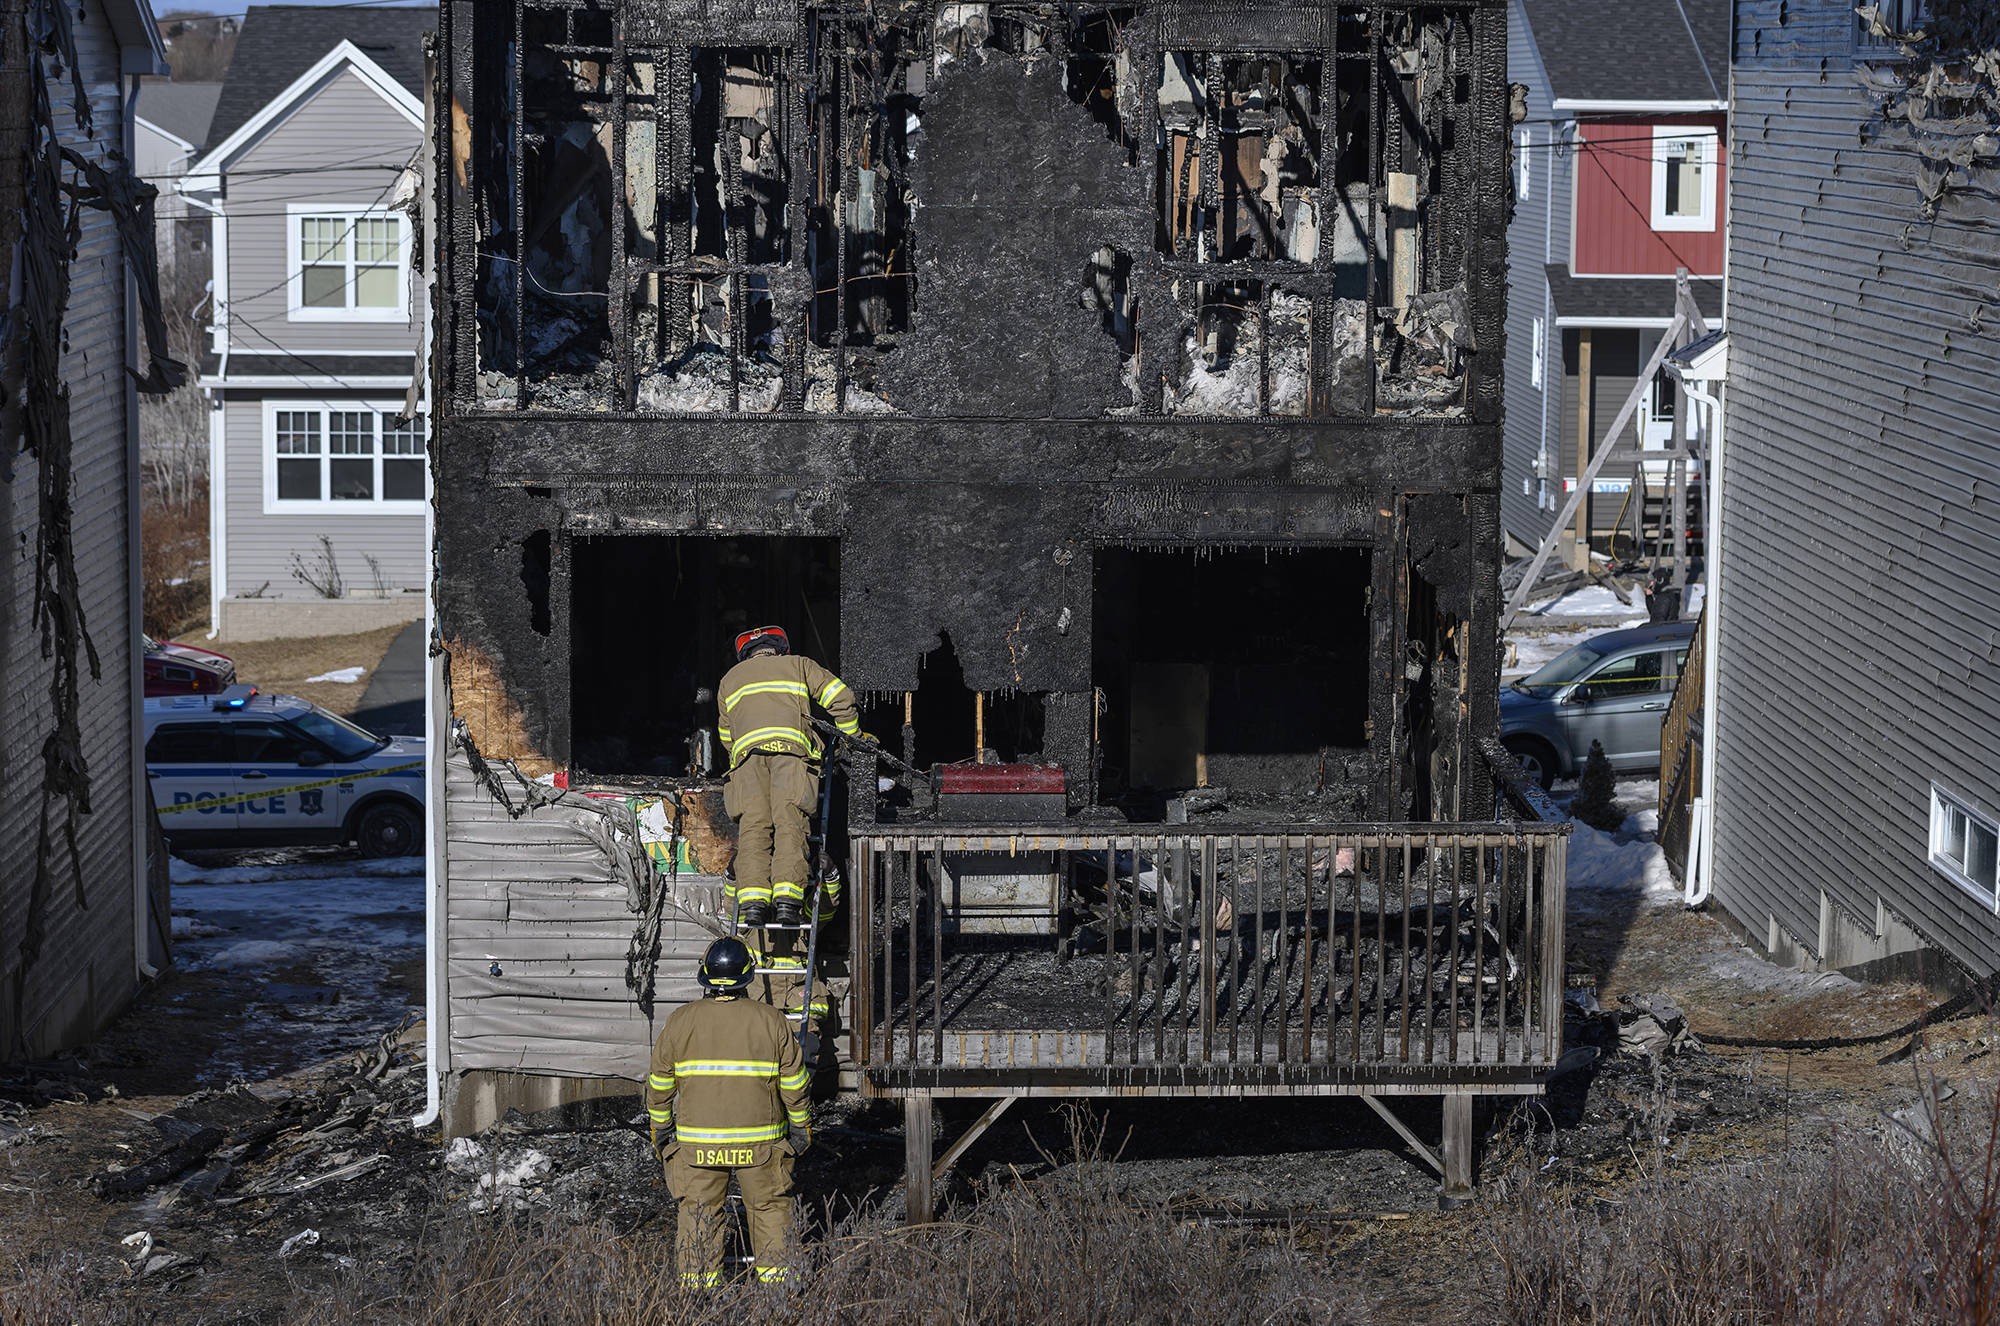 Firefighters investigate following a house fire in the Spryfield community in Halifax on Tuesday, February 19, 2019. Halifax police say they have responded to a fatal fire in the city, although there are no details on how many people are victims. Police say firefighters were called to a home on Quartz Drive in Spryfield around 1 a.m. today. (Darren Calabrese/The Canadian Press)